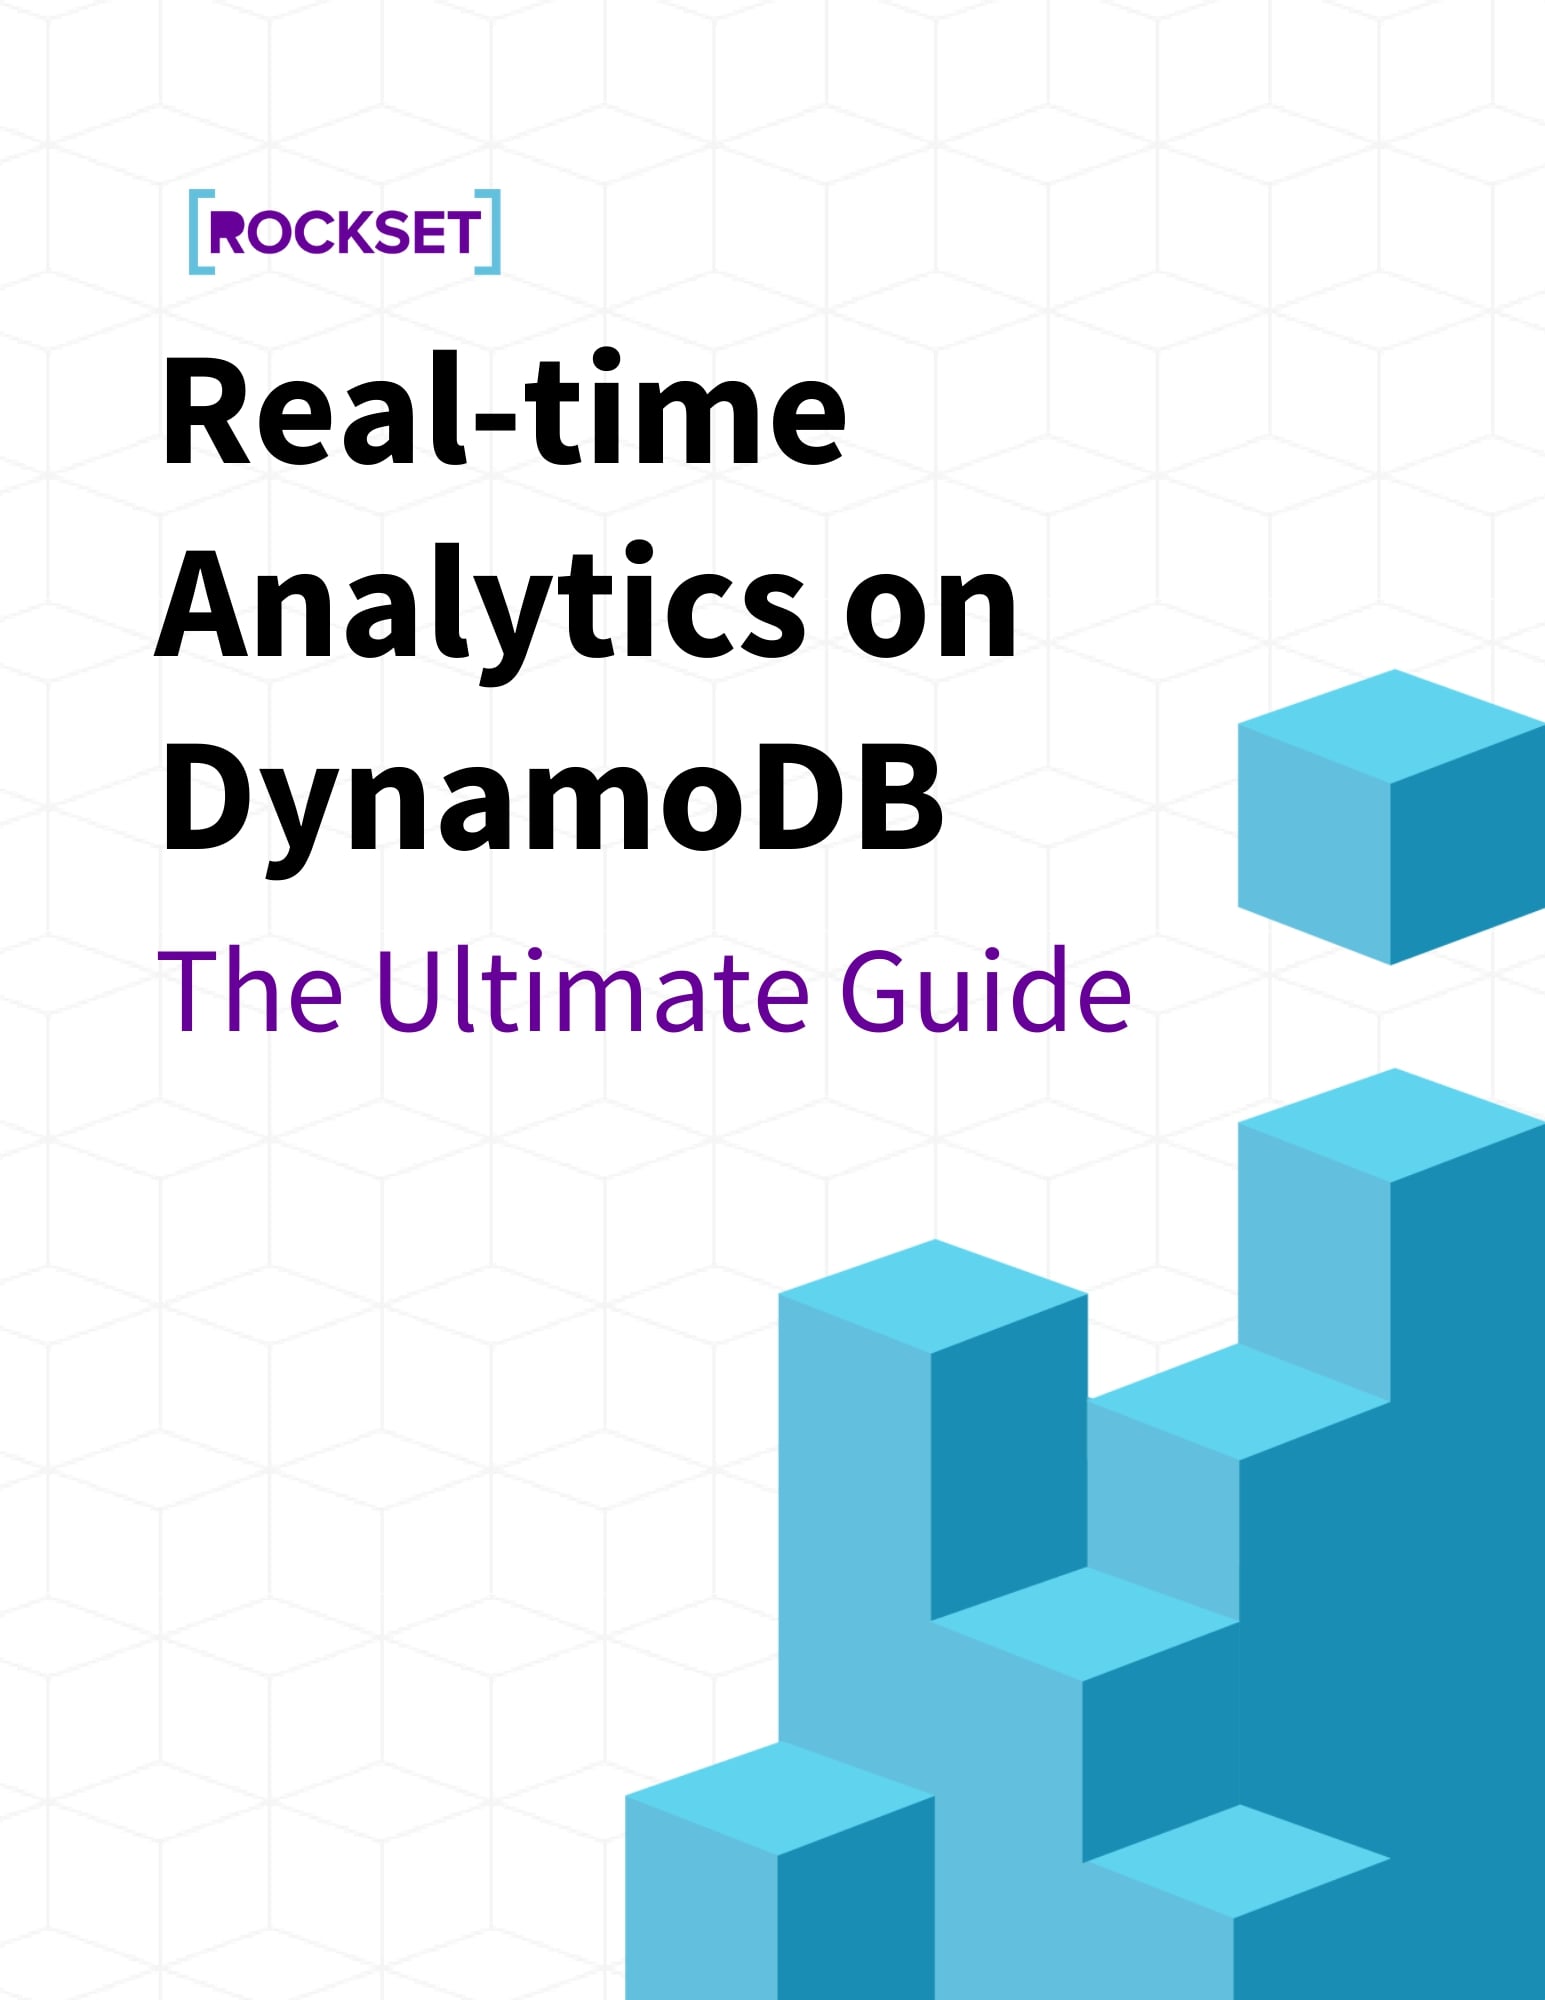 The Ultimate Guide to Real-Time Analytics on DynamoDB